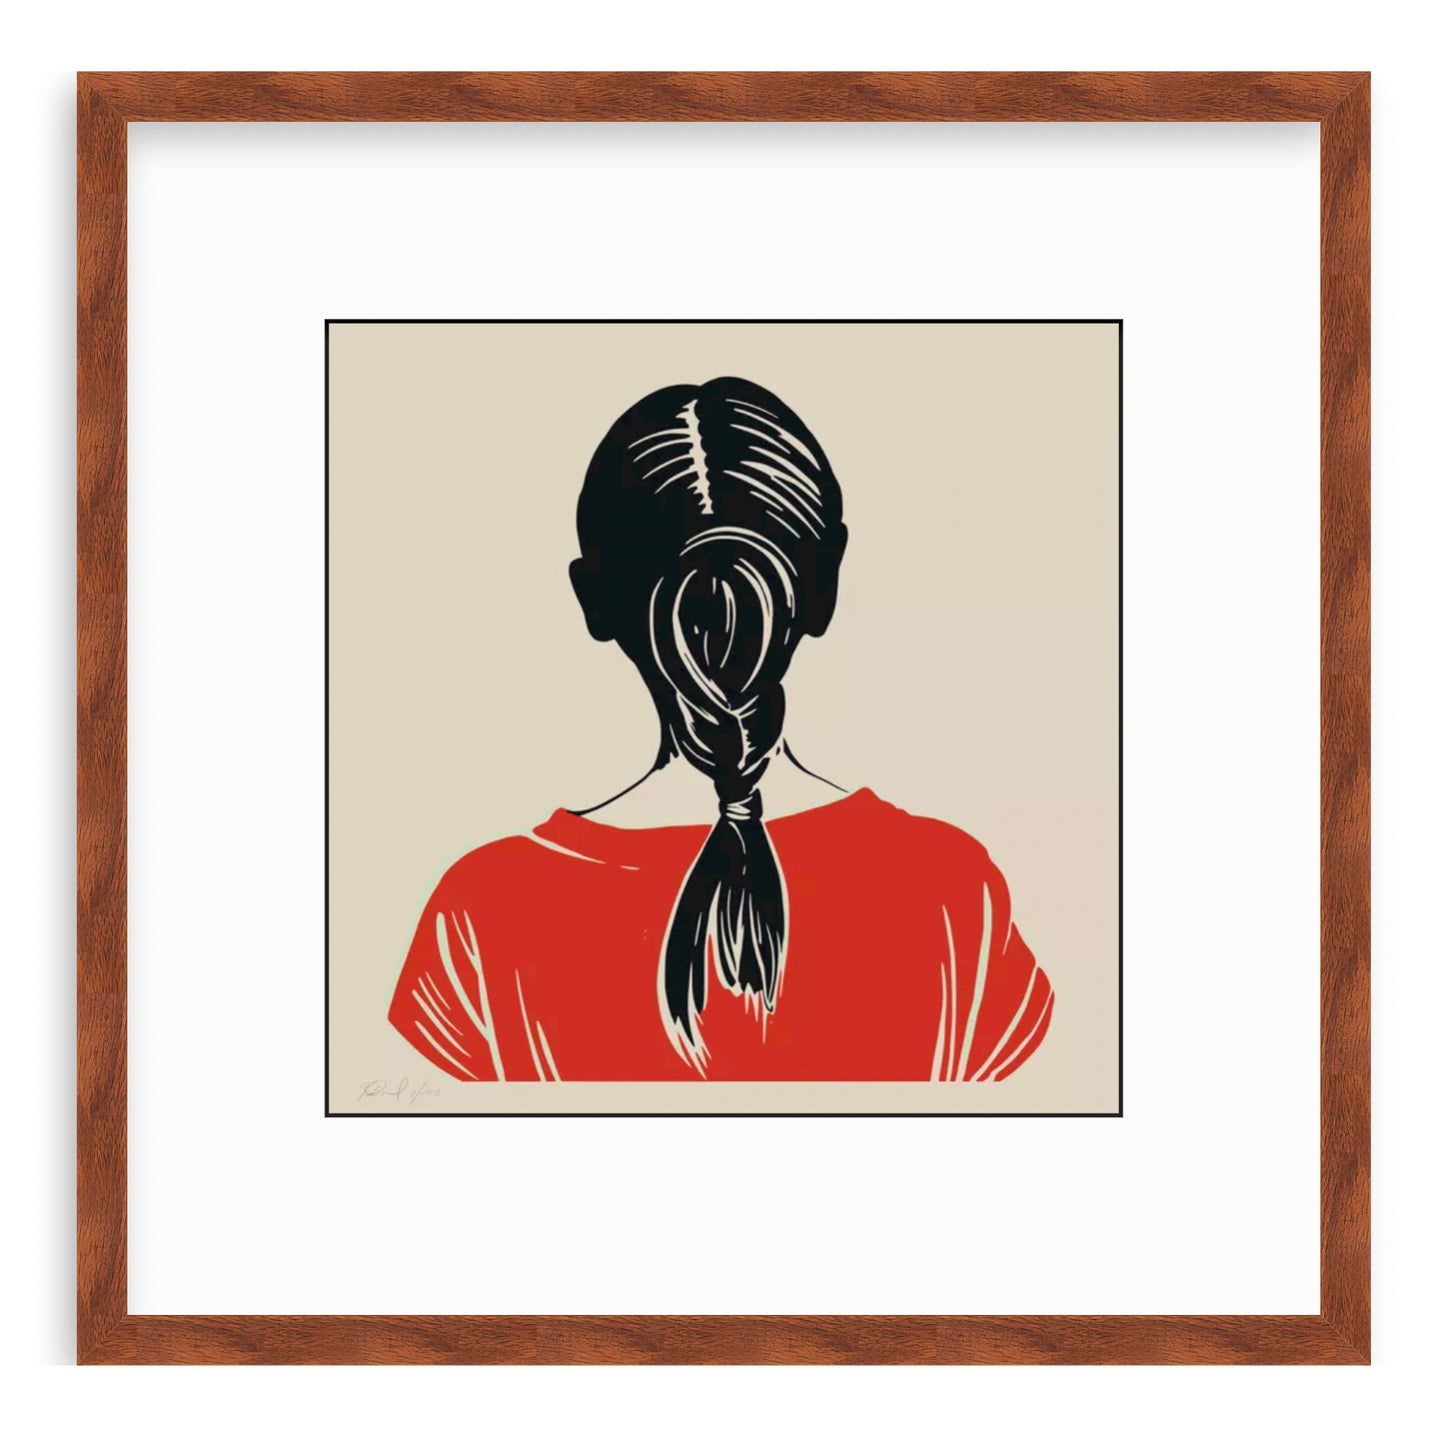 Woman With a Braid